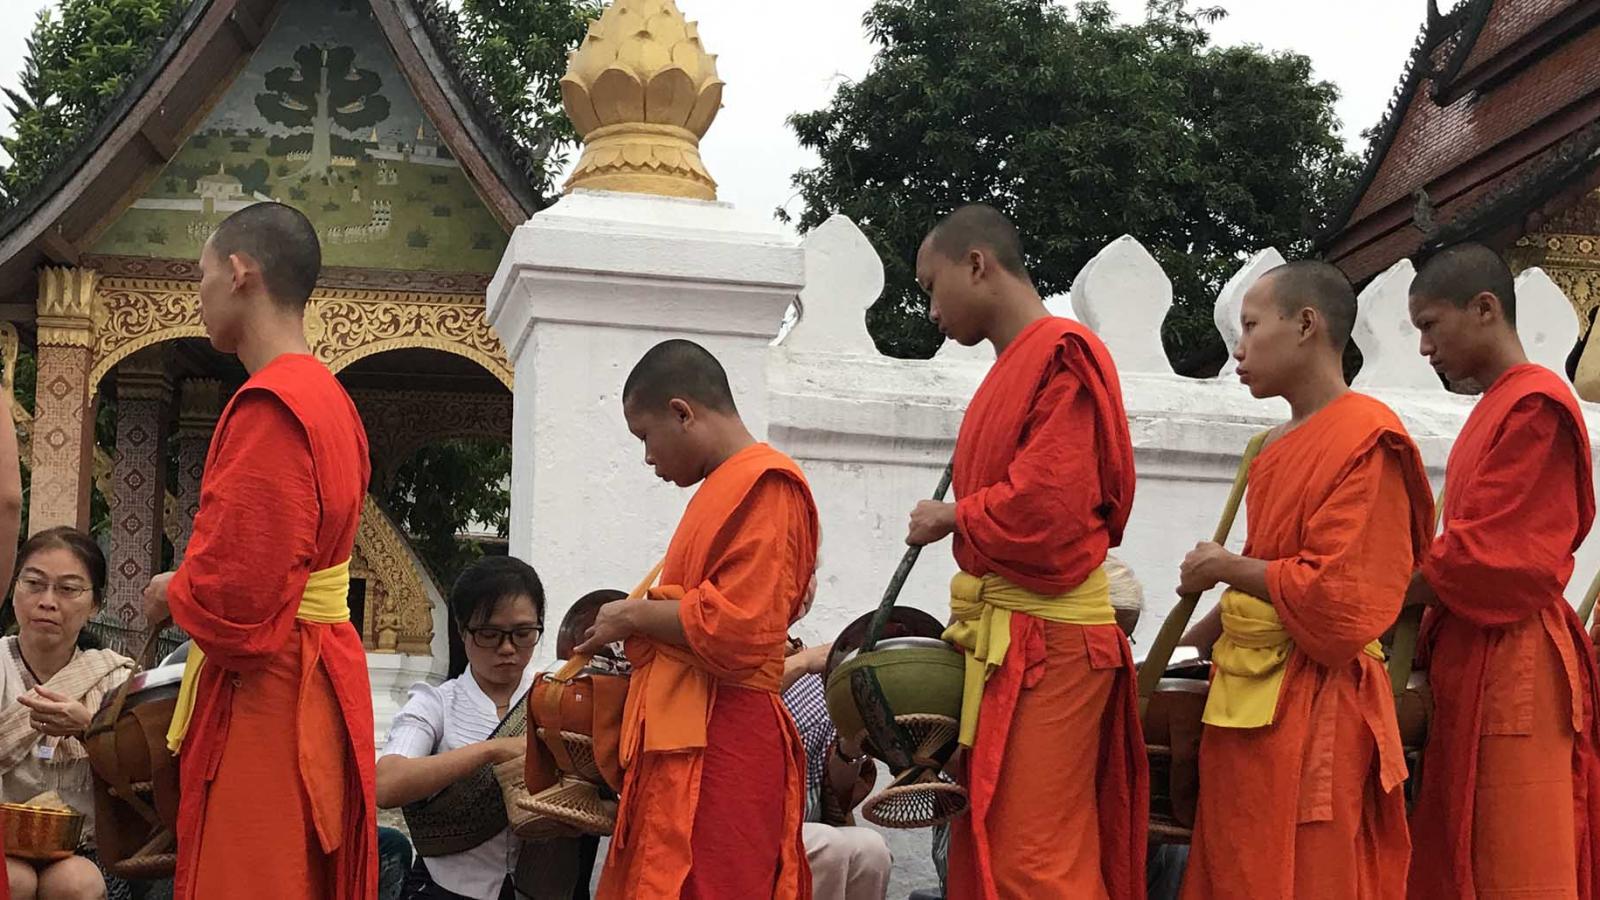 Experience early morning alms giving in Luang Prabang